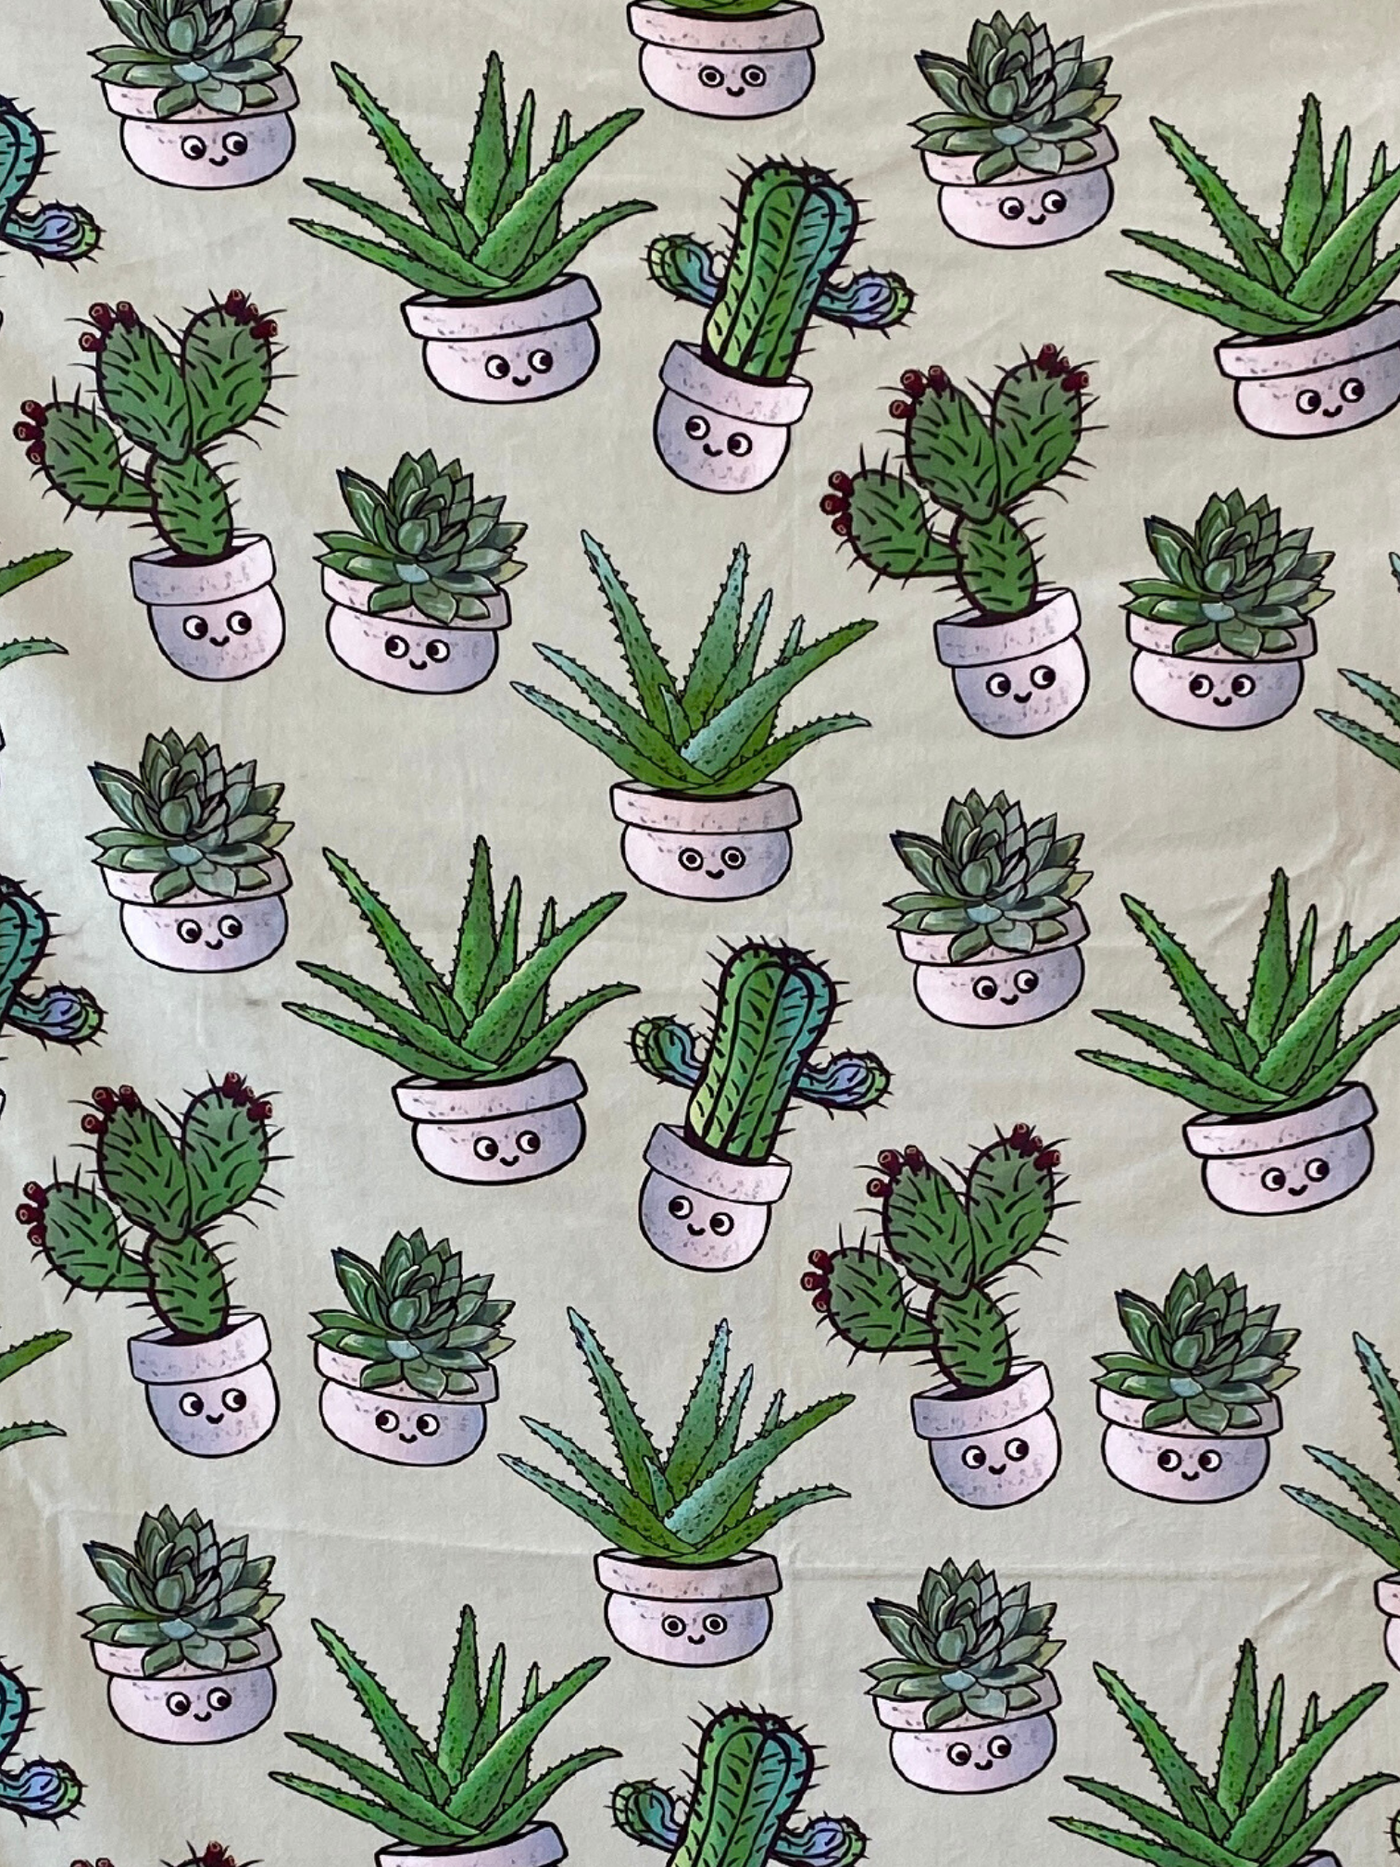 Kid Towel (0-3 years): Soft Cactus and Succulent Plants Sage Green